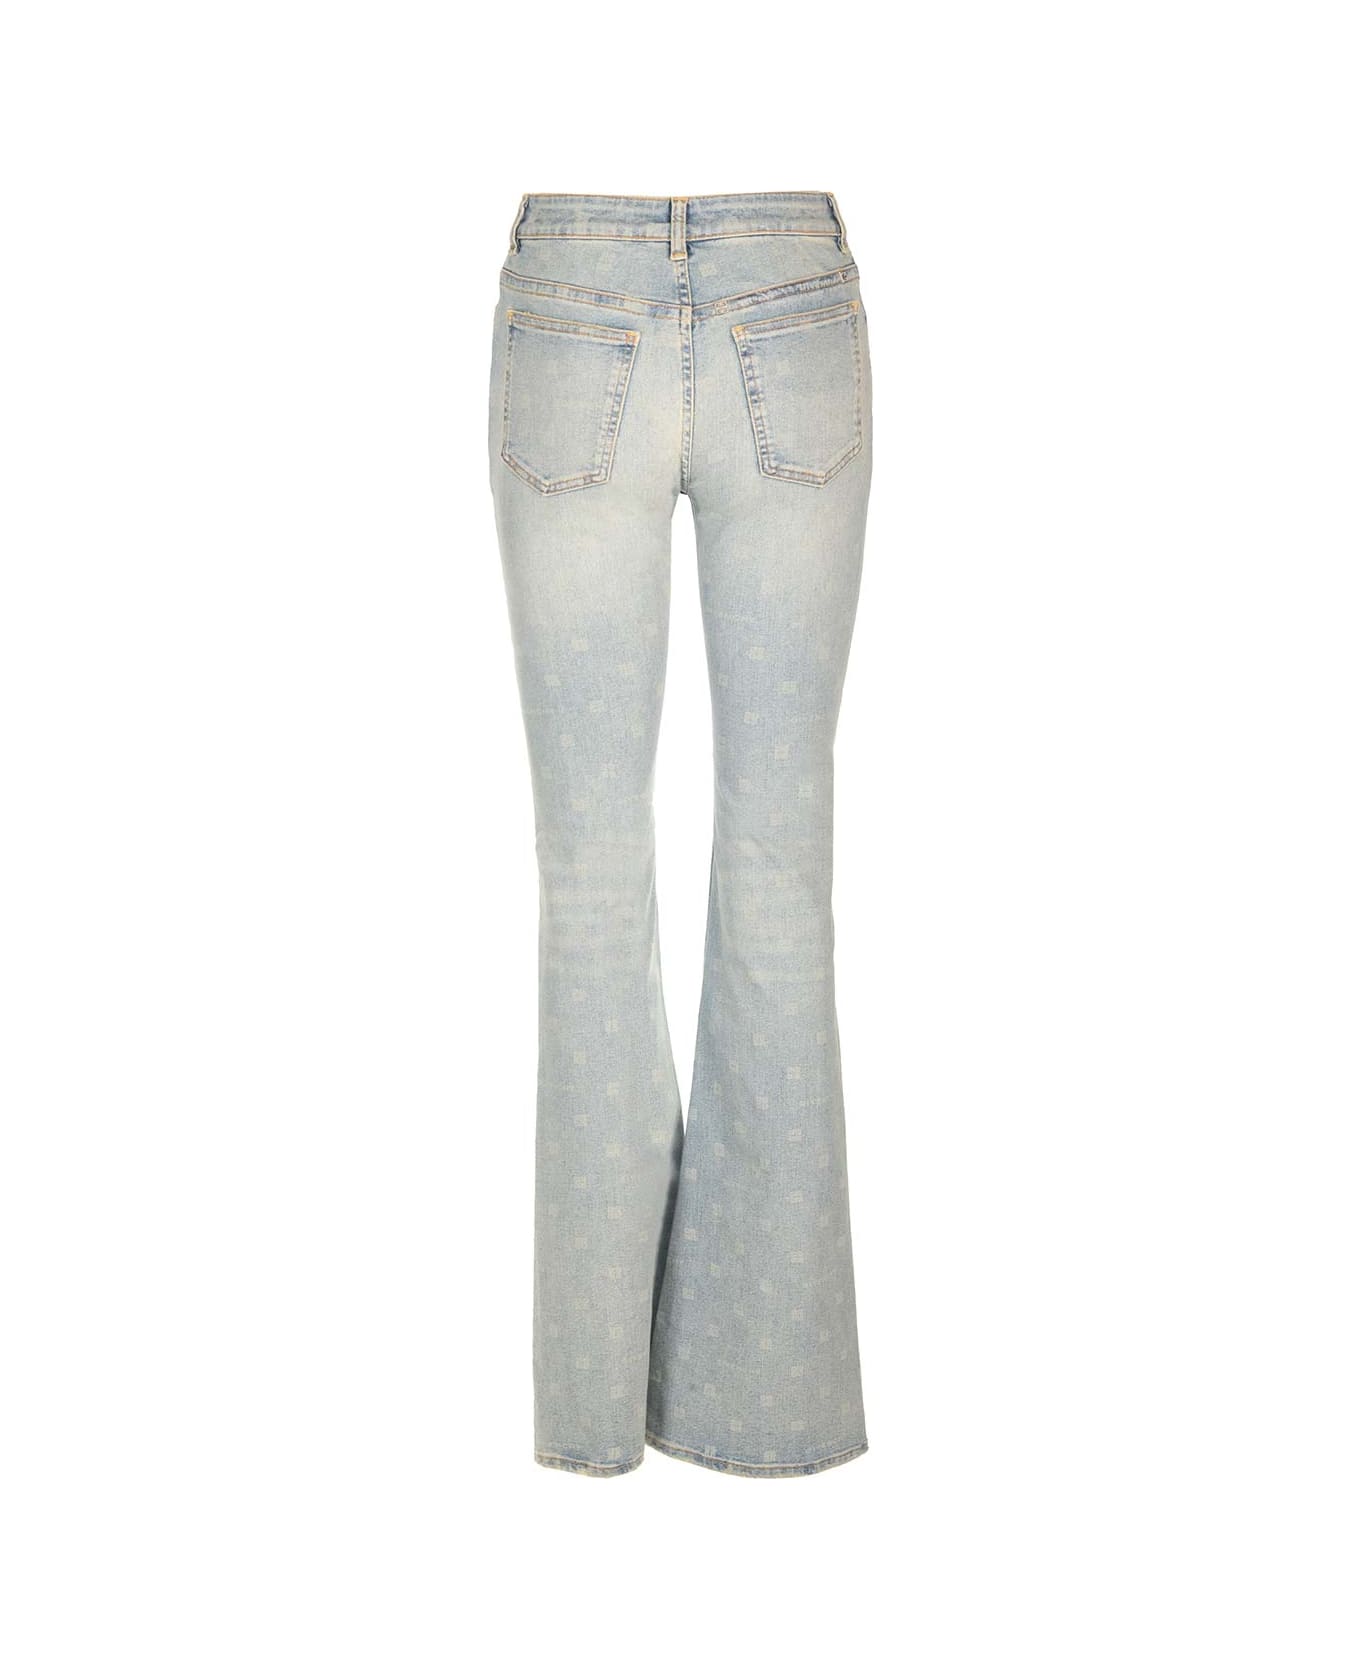 Givenchy Bootcut Jeans - Blue デニム